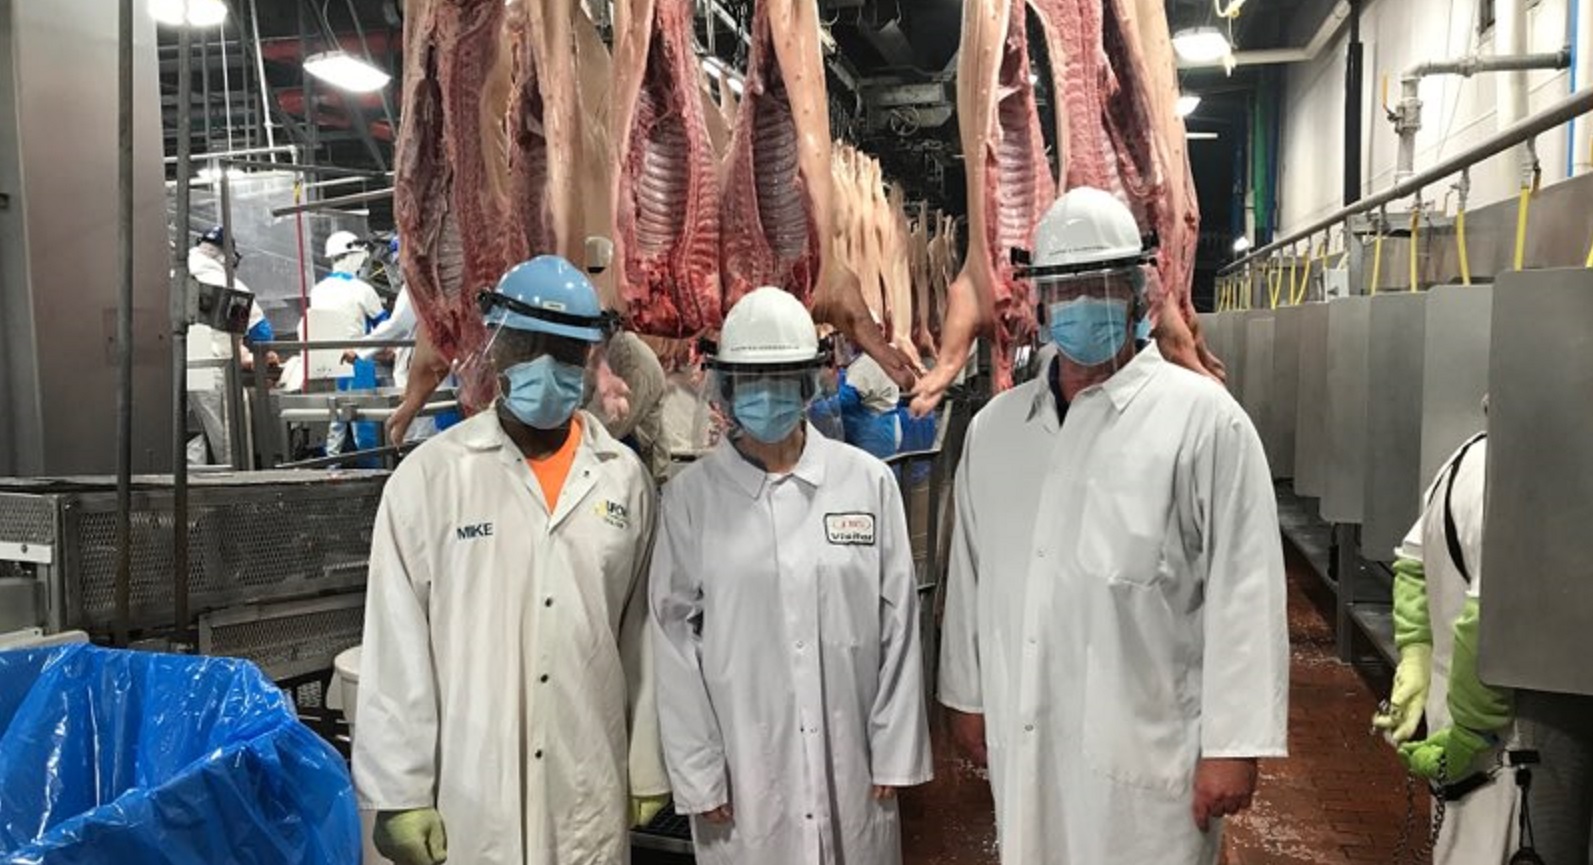 UFCW: As COVID Meatpacking Risks Continue, Pass New Mandating Safer Line Speeds to Protect Essential Workers Keeping Food Supply Secure - The Food & Commercial Workers International Union